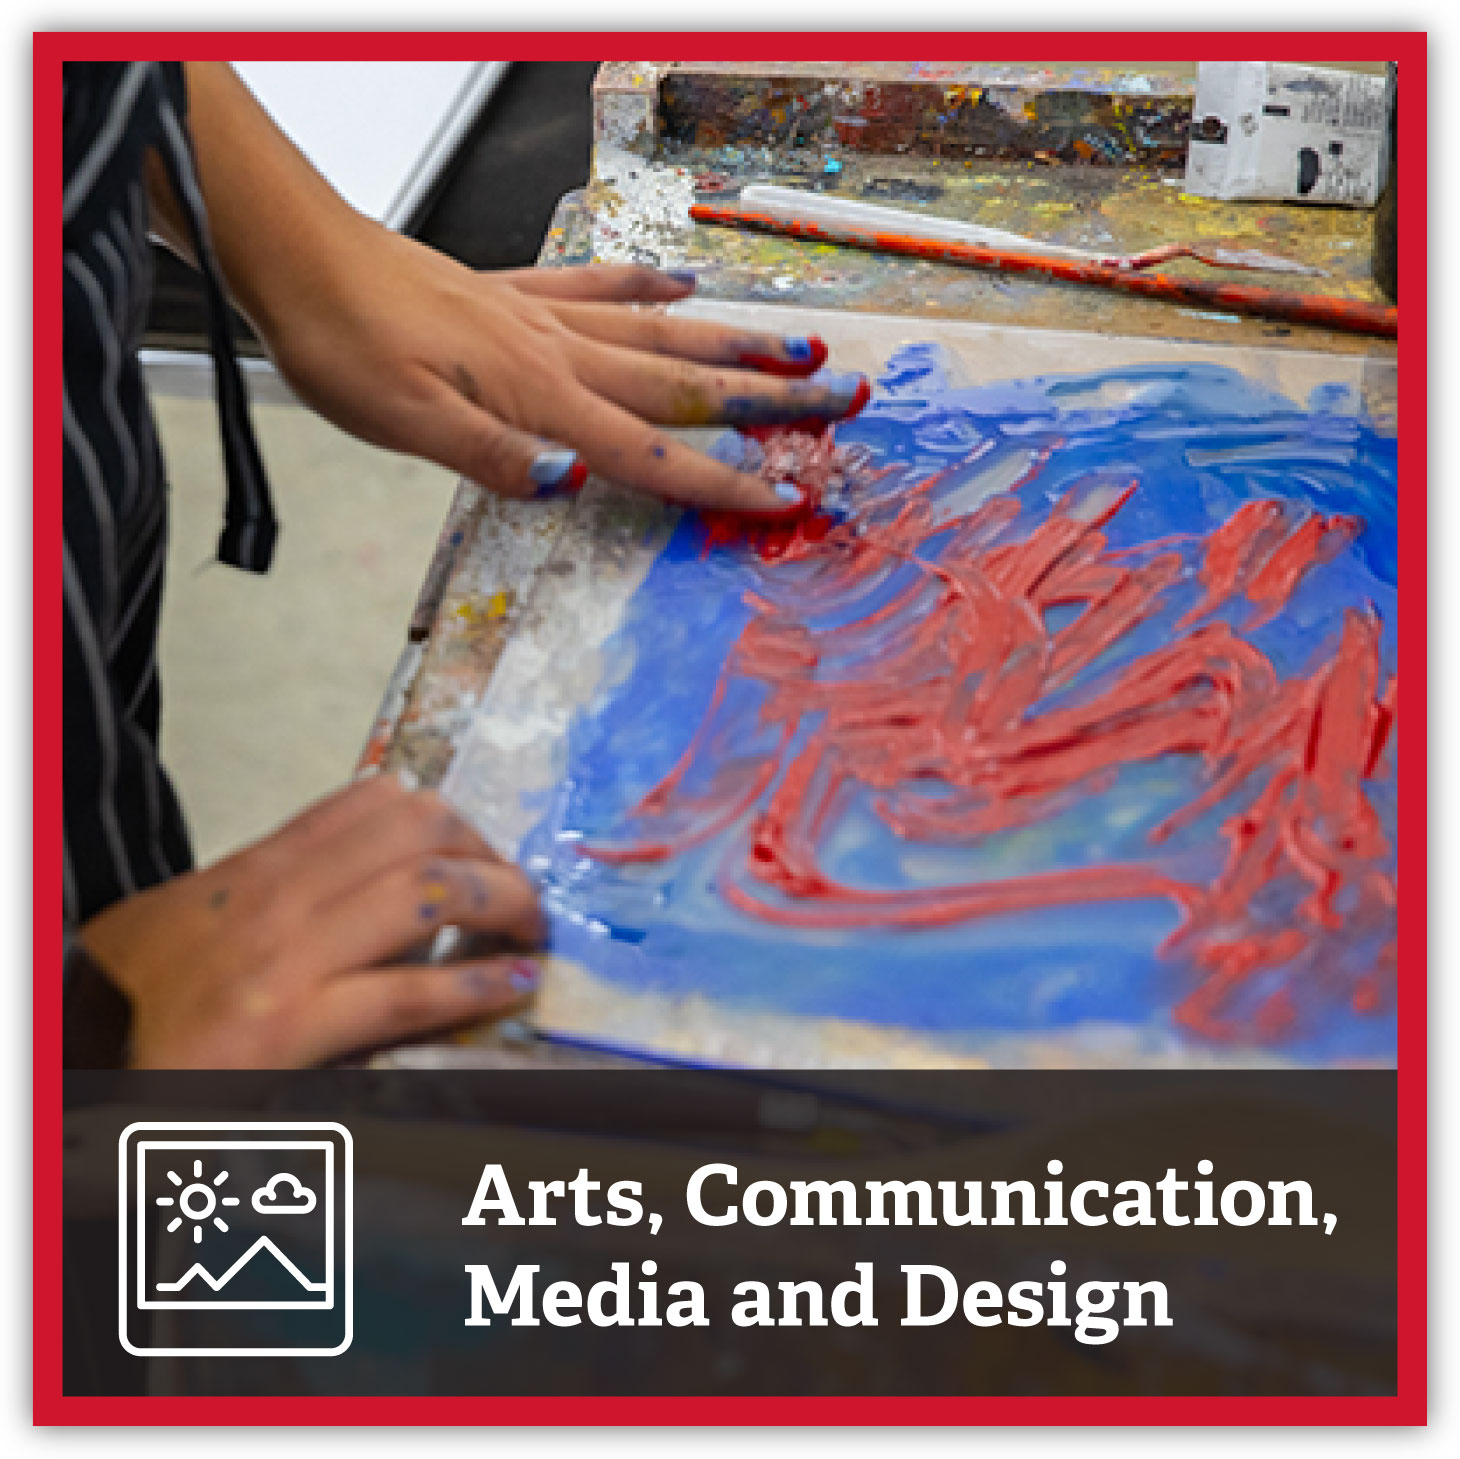 Student painting. Arts, Communication, Media and Design.